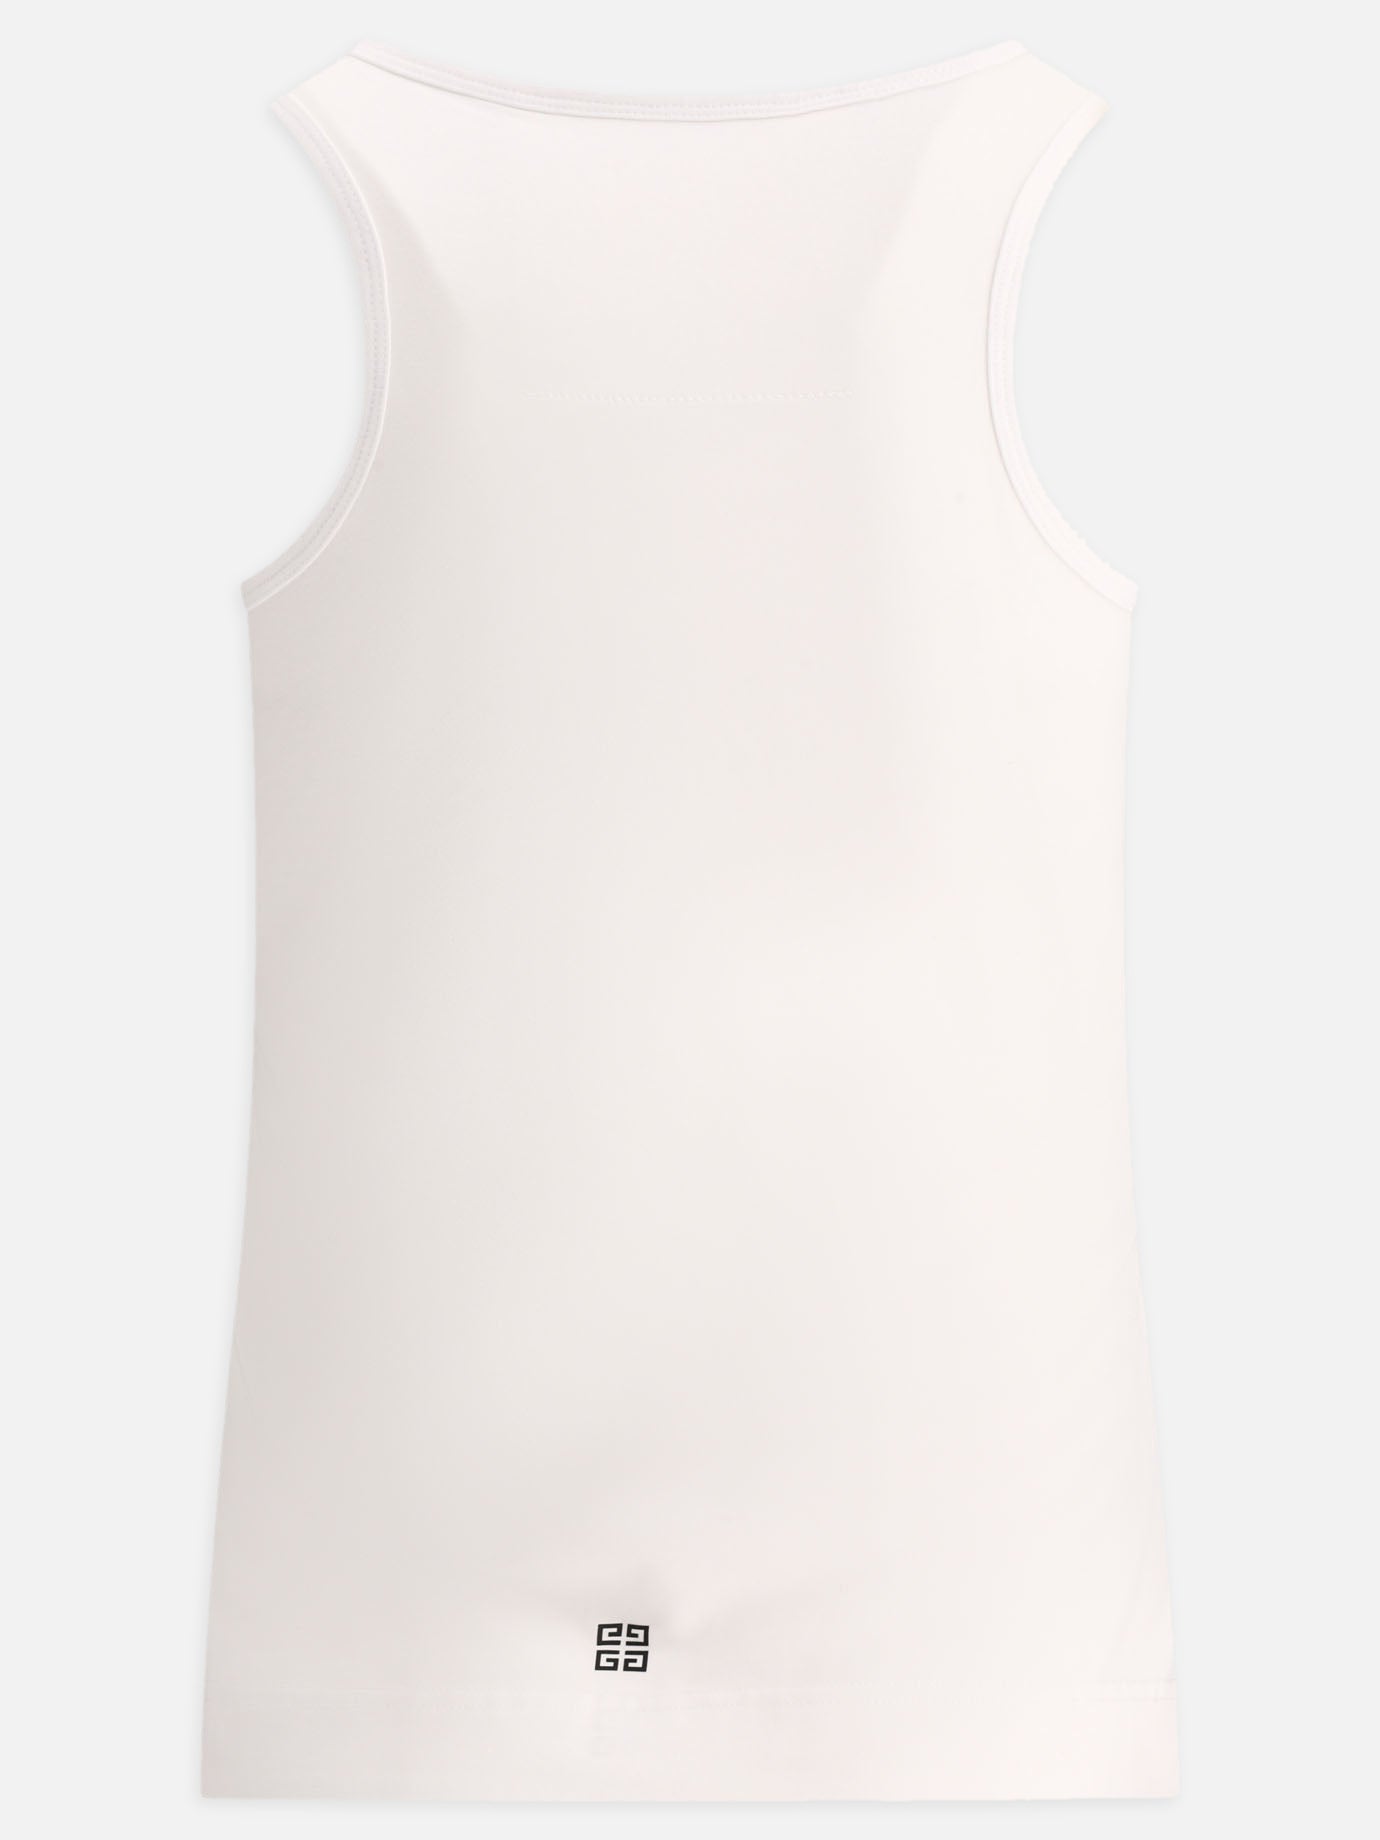 "GIVENCHY Archetype" tank top